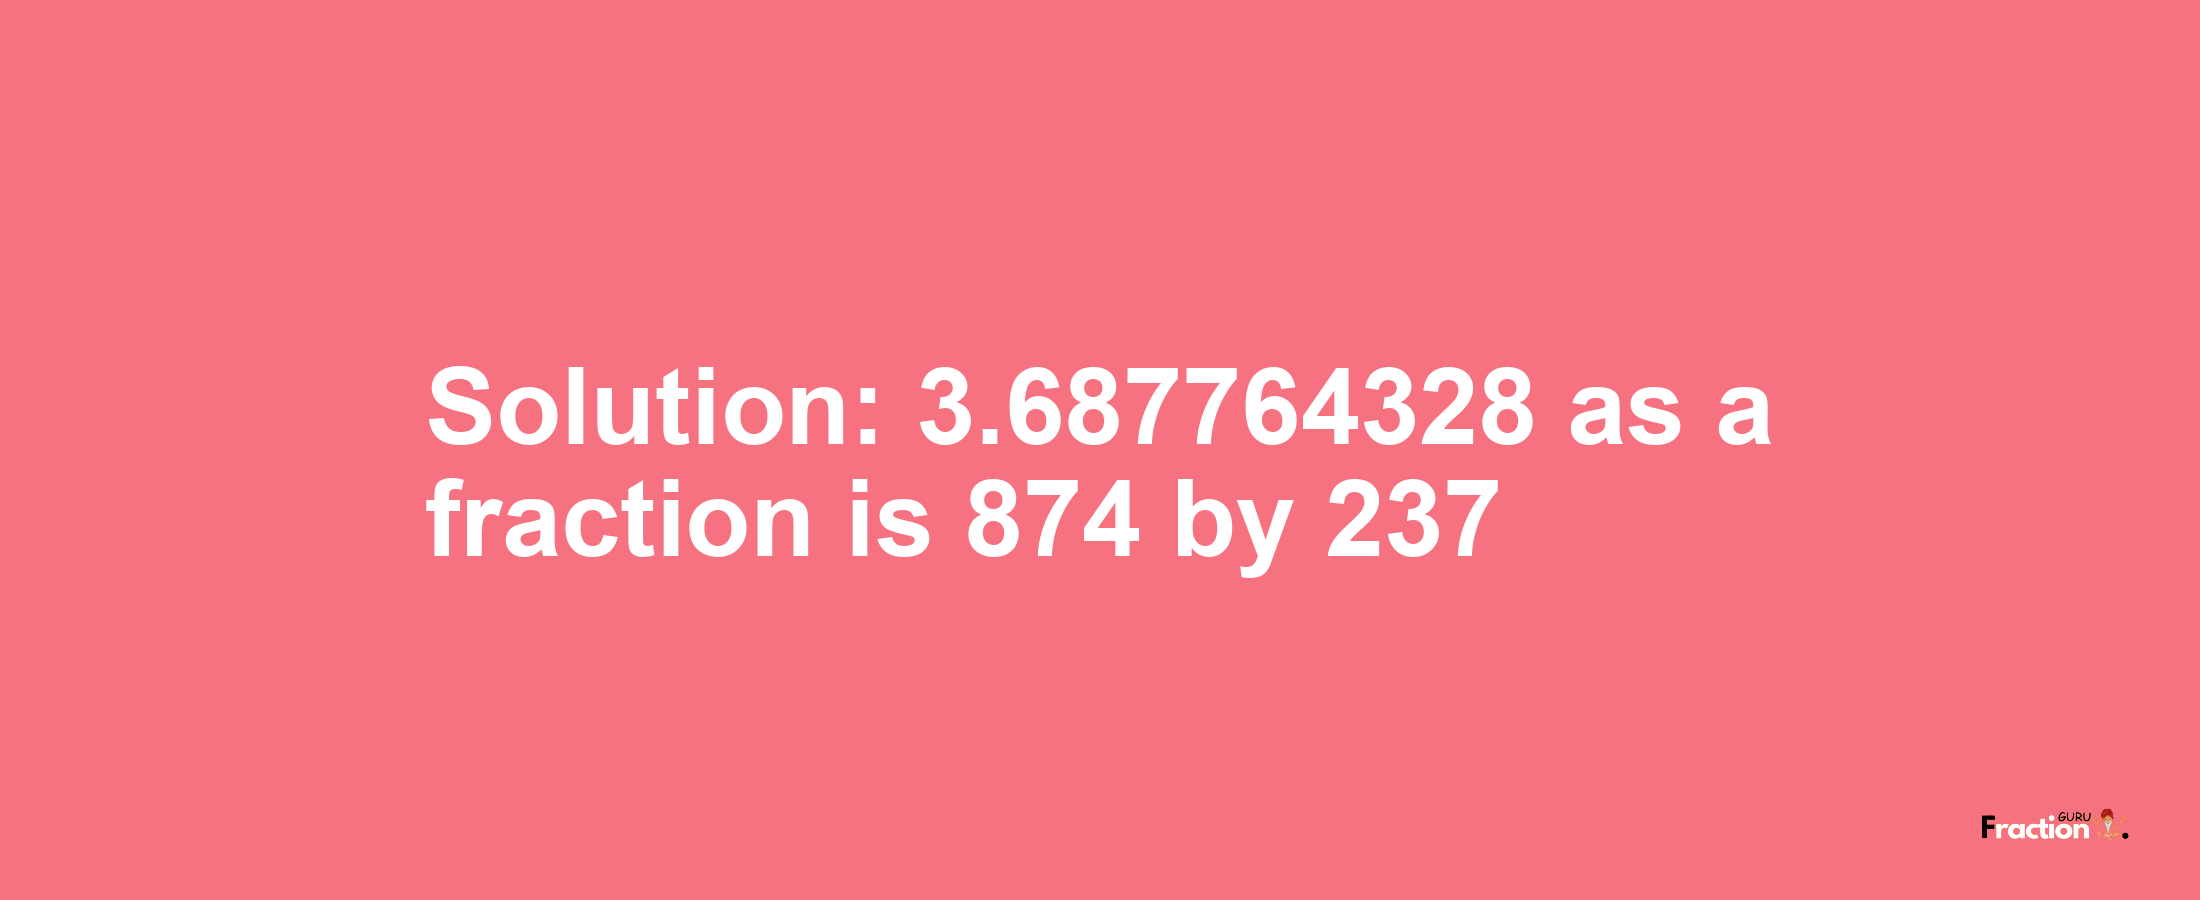 Solution:3.687764328 as a fraction is 874/237